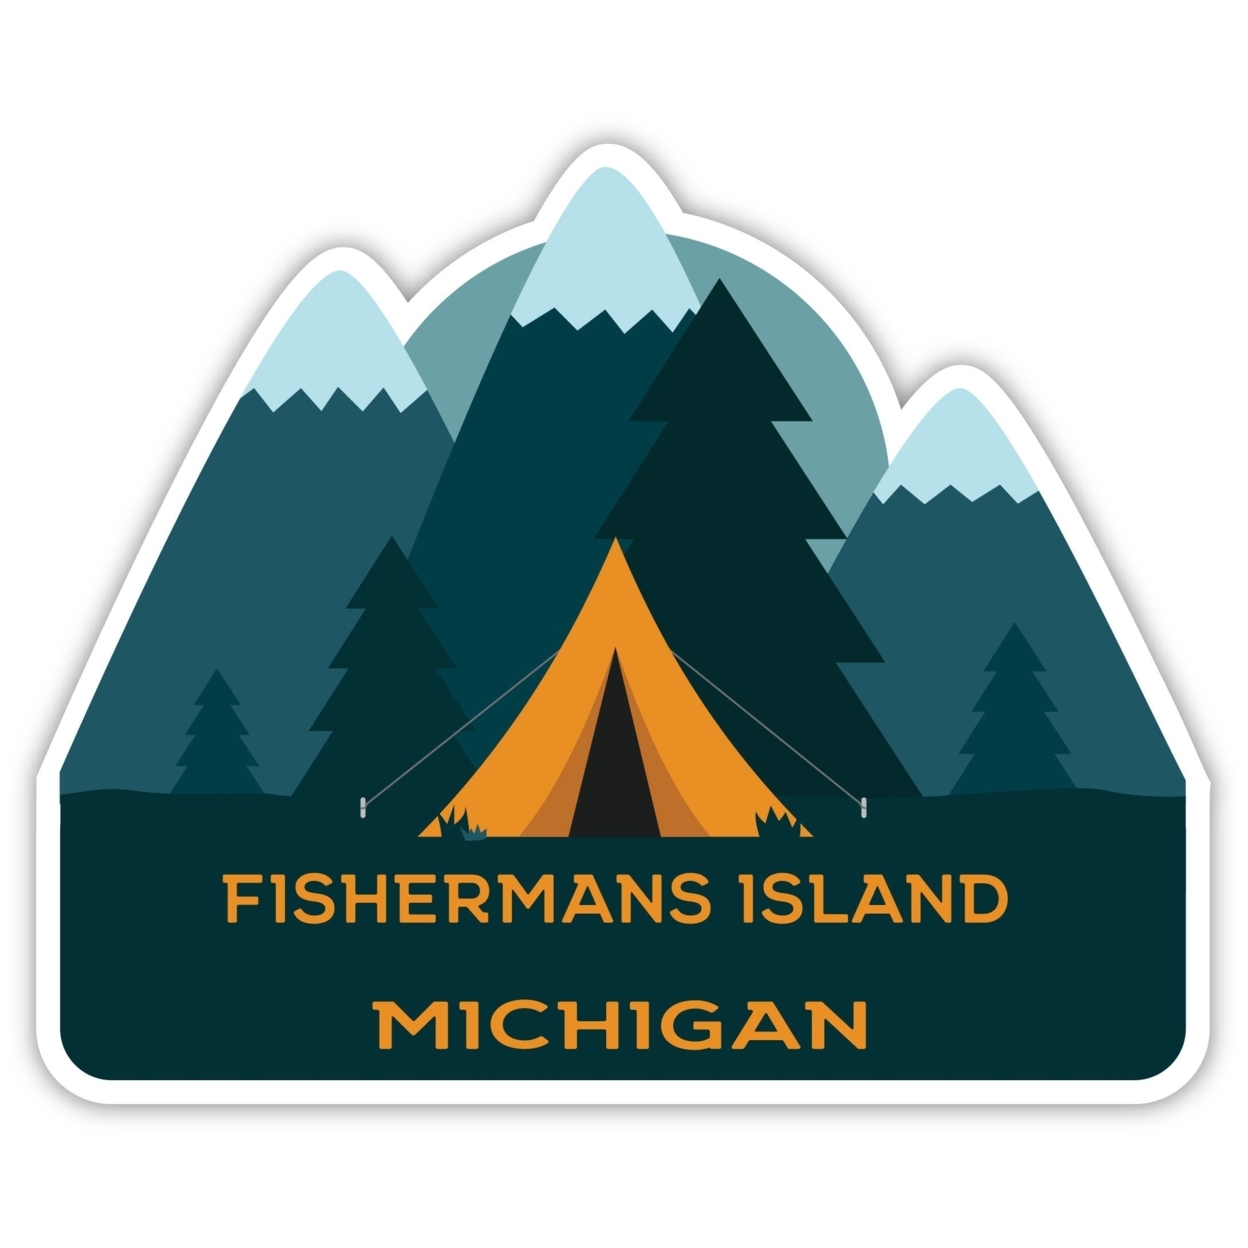 Fishermans Island Michigan Souvenir Decorative Stickers (Choose Theme And Size) - 4-Pack, 4-Inch, Tent